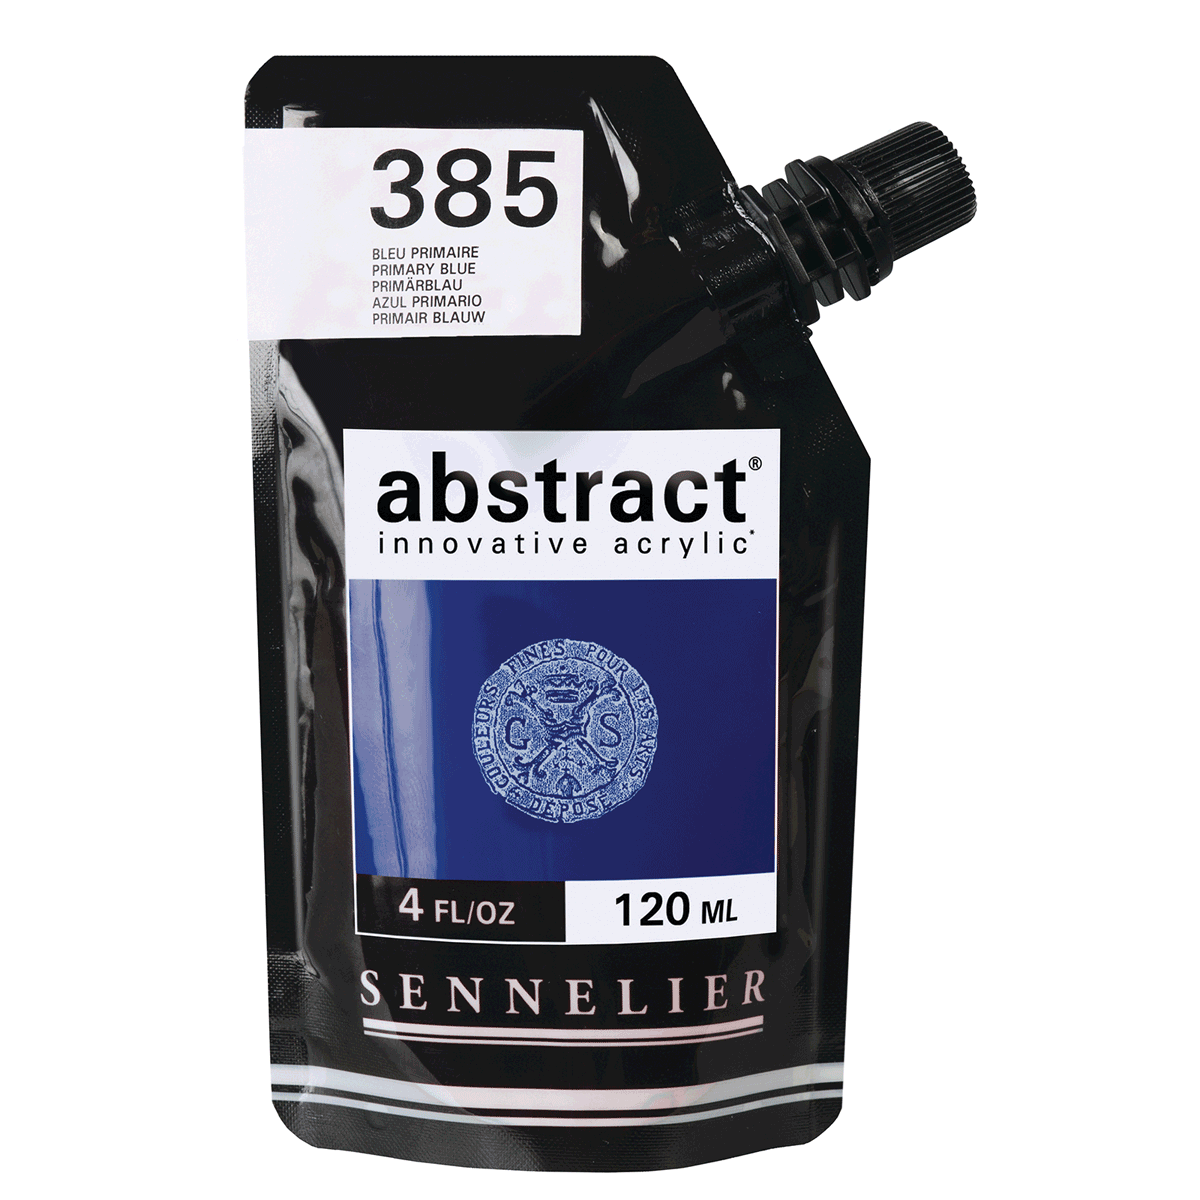 Sennelier Abstract Acrylic Paint Pouch - Satin 385 Primary Blue 120ml